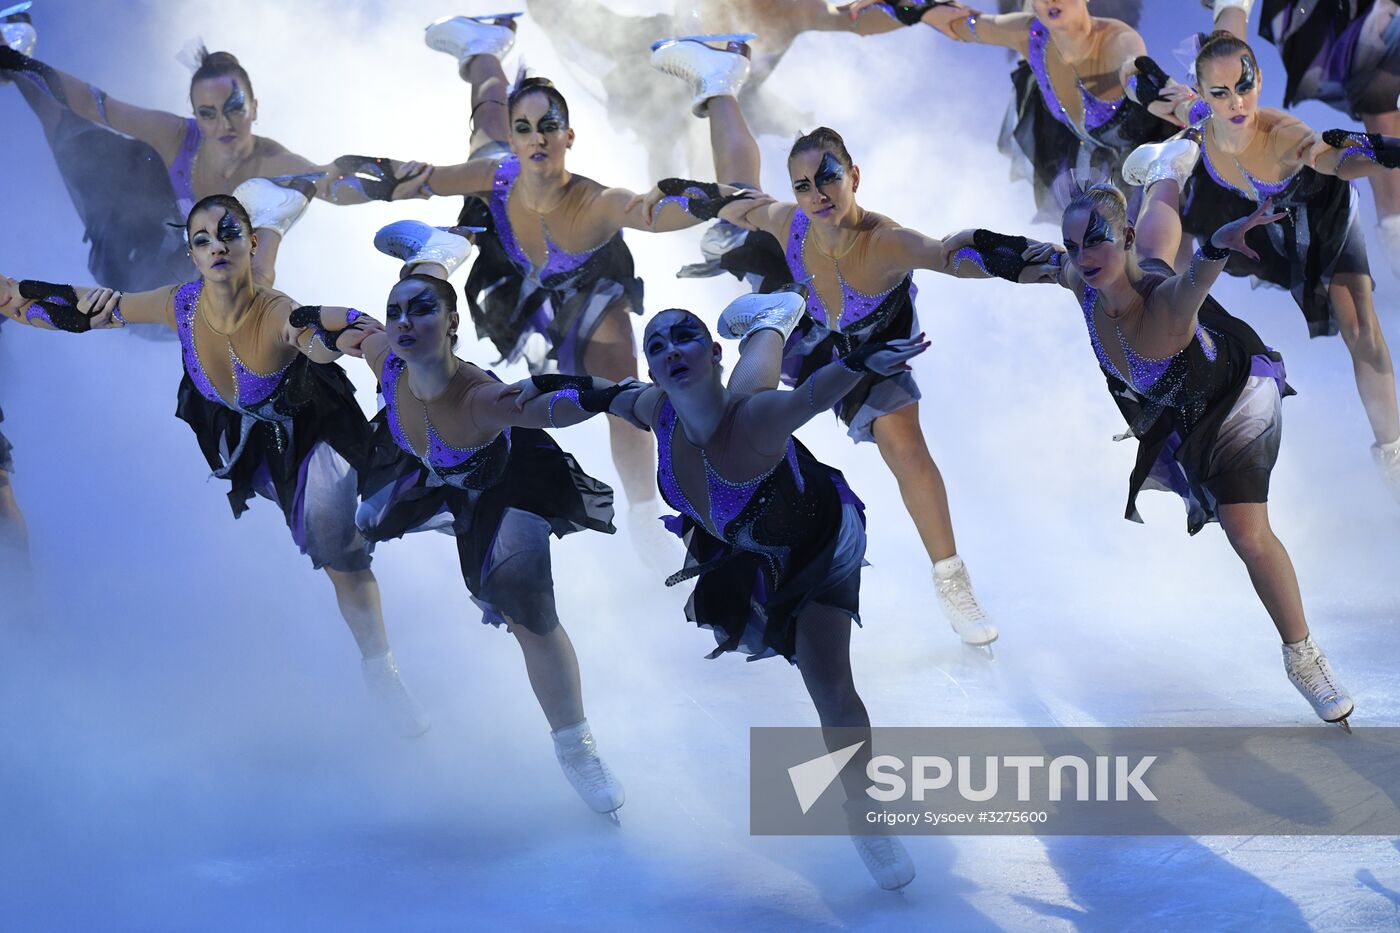 Opening ceremony of European Figure Skating Championships